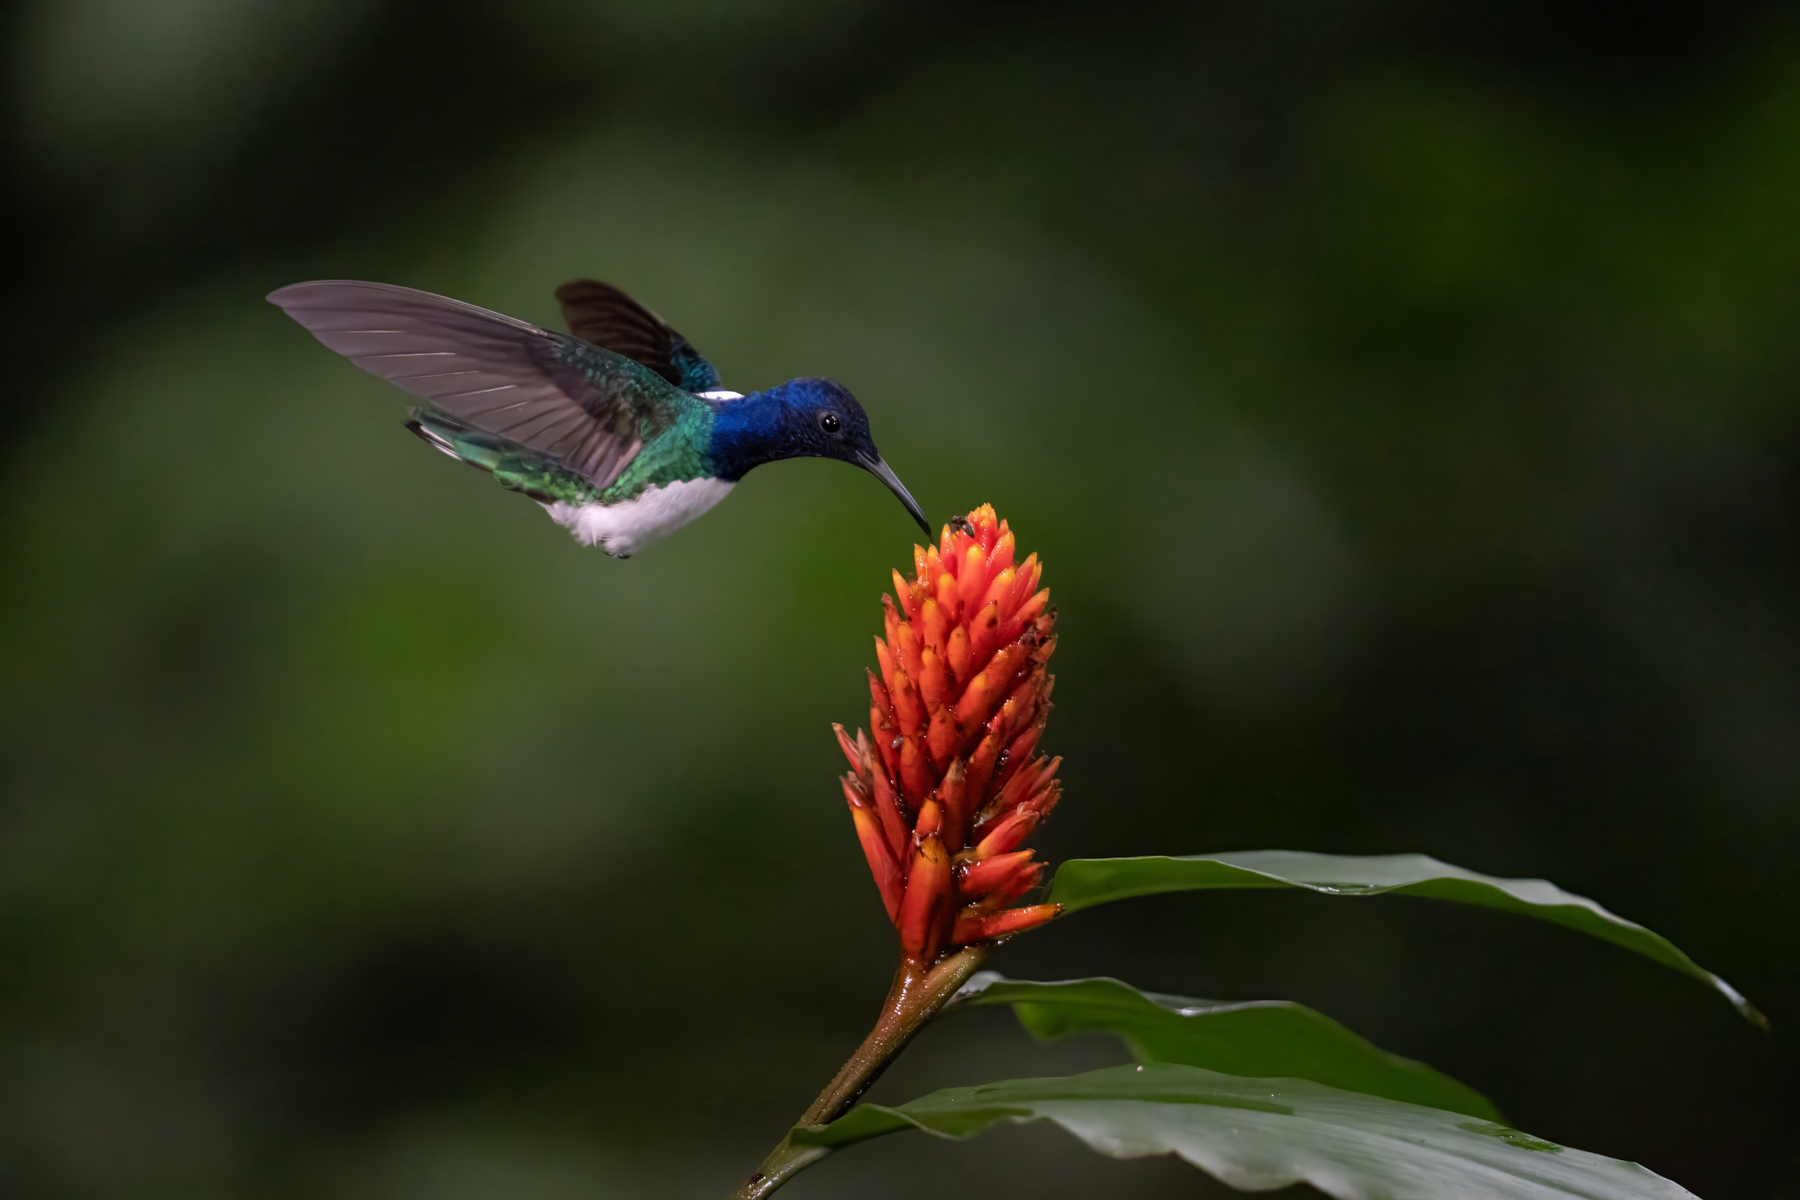 A White-naped Jacobin hovering above a rainforest flower (image by Inger Vandyke)